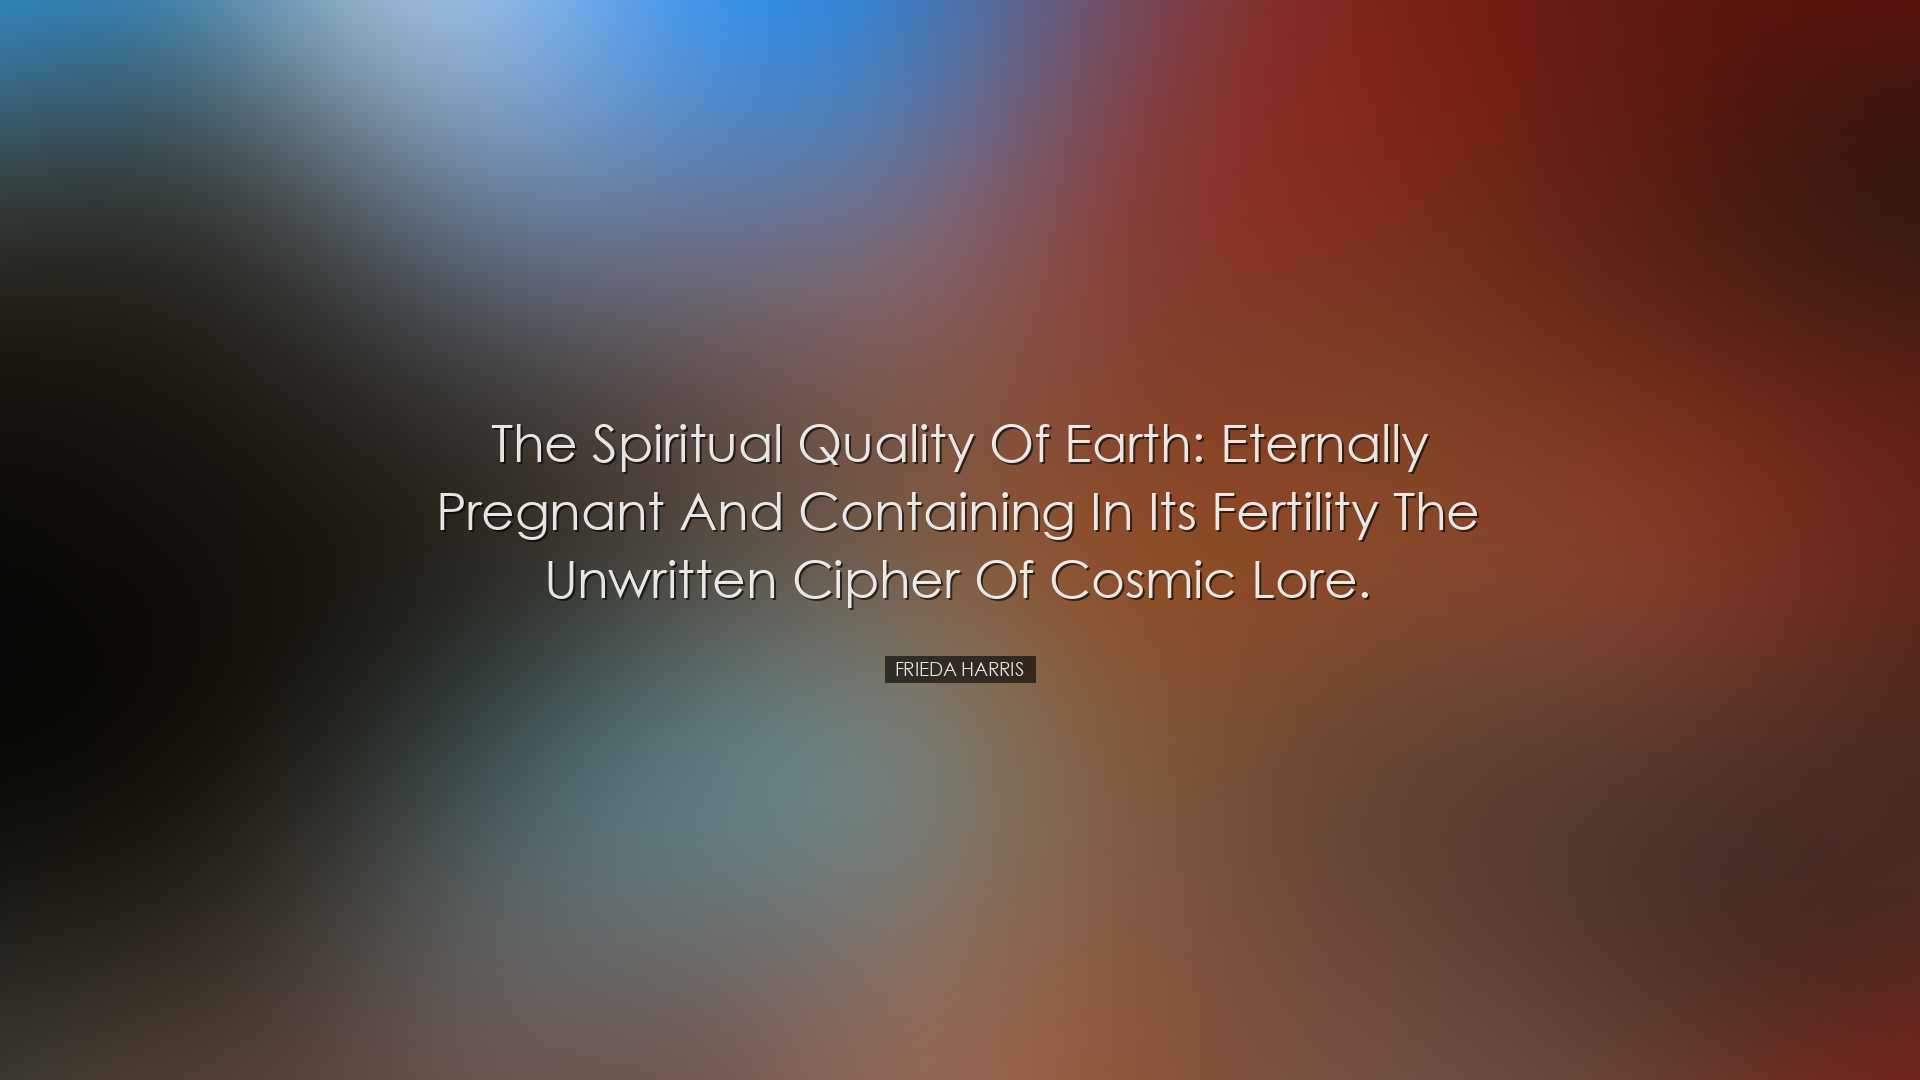 The spiritual quality of earth: eternally pregnant and containing